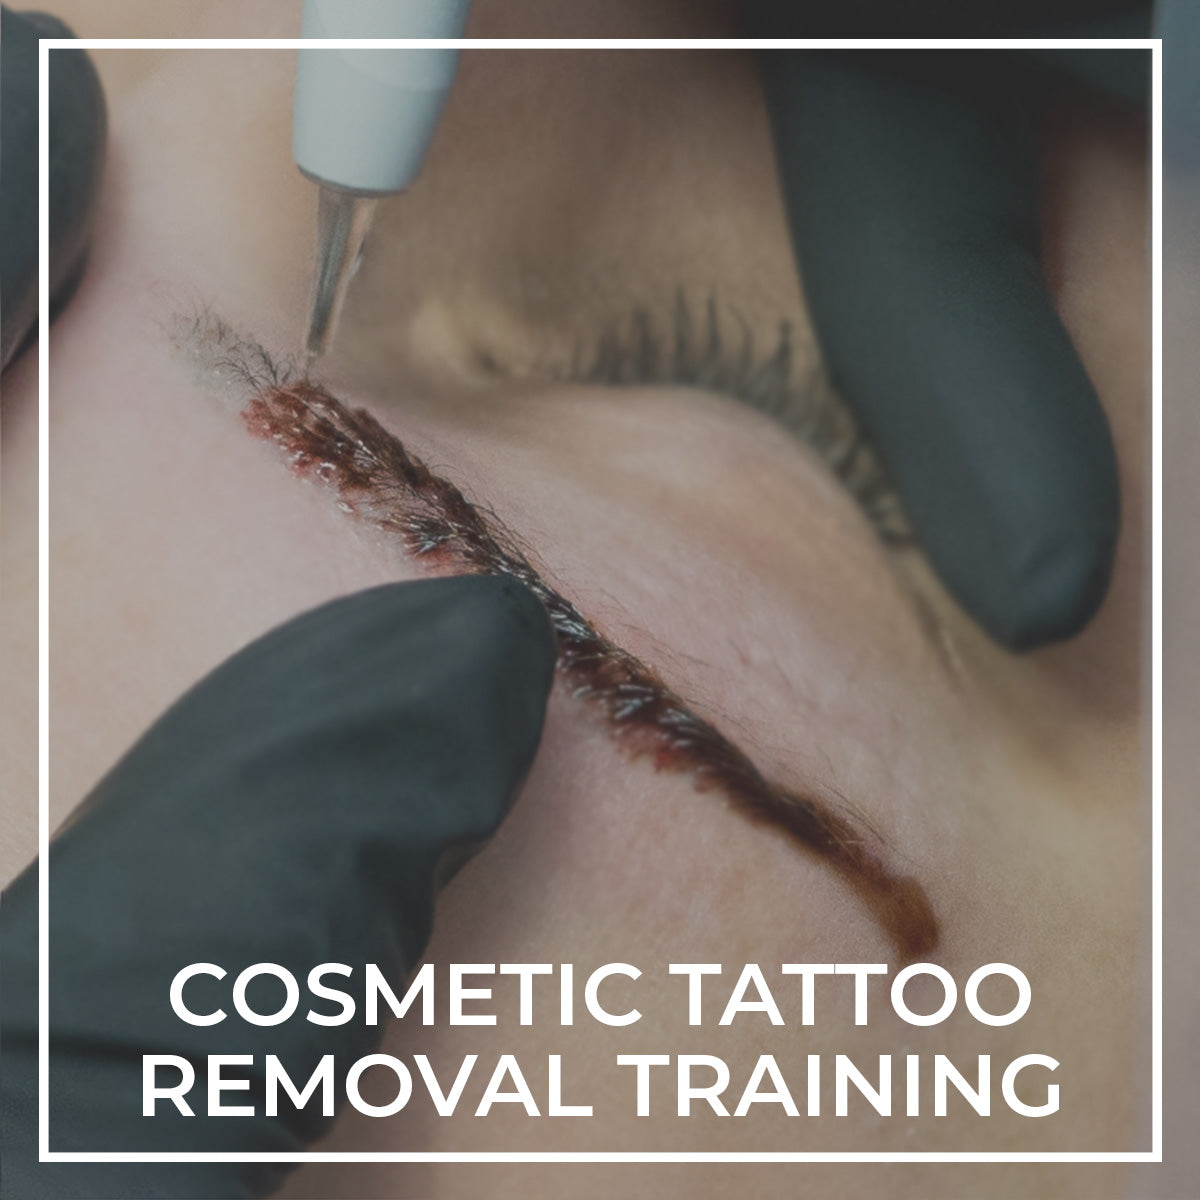 Sweden Tattoo Removal Training Course  New Look Laser College